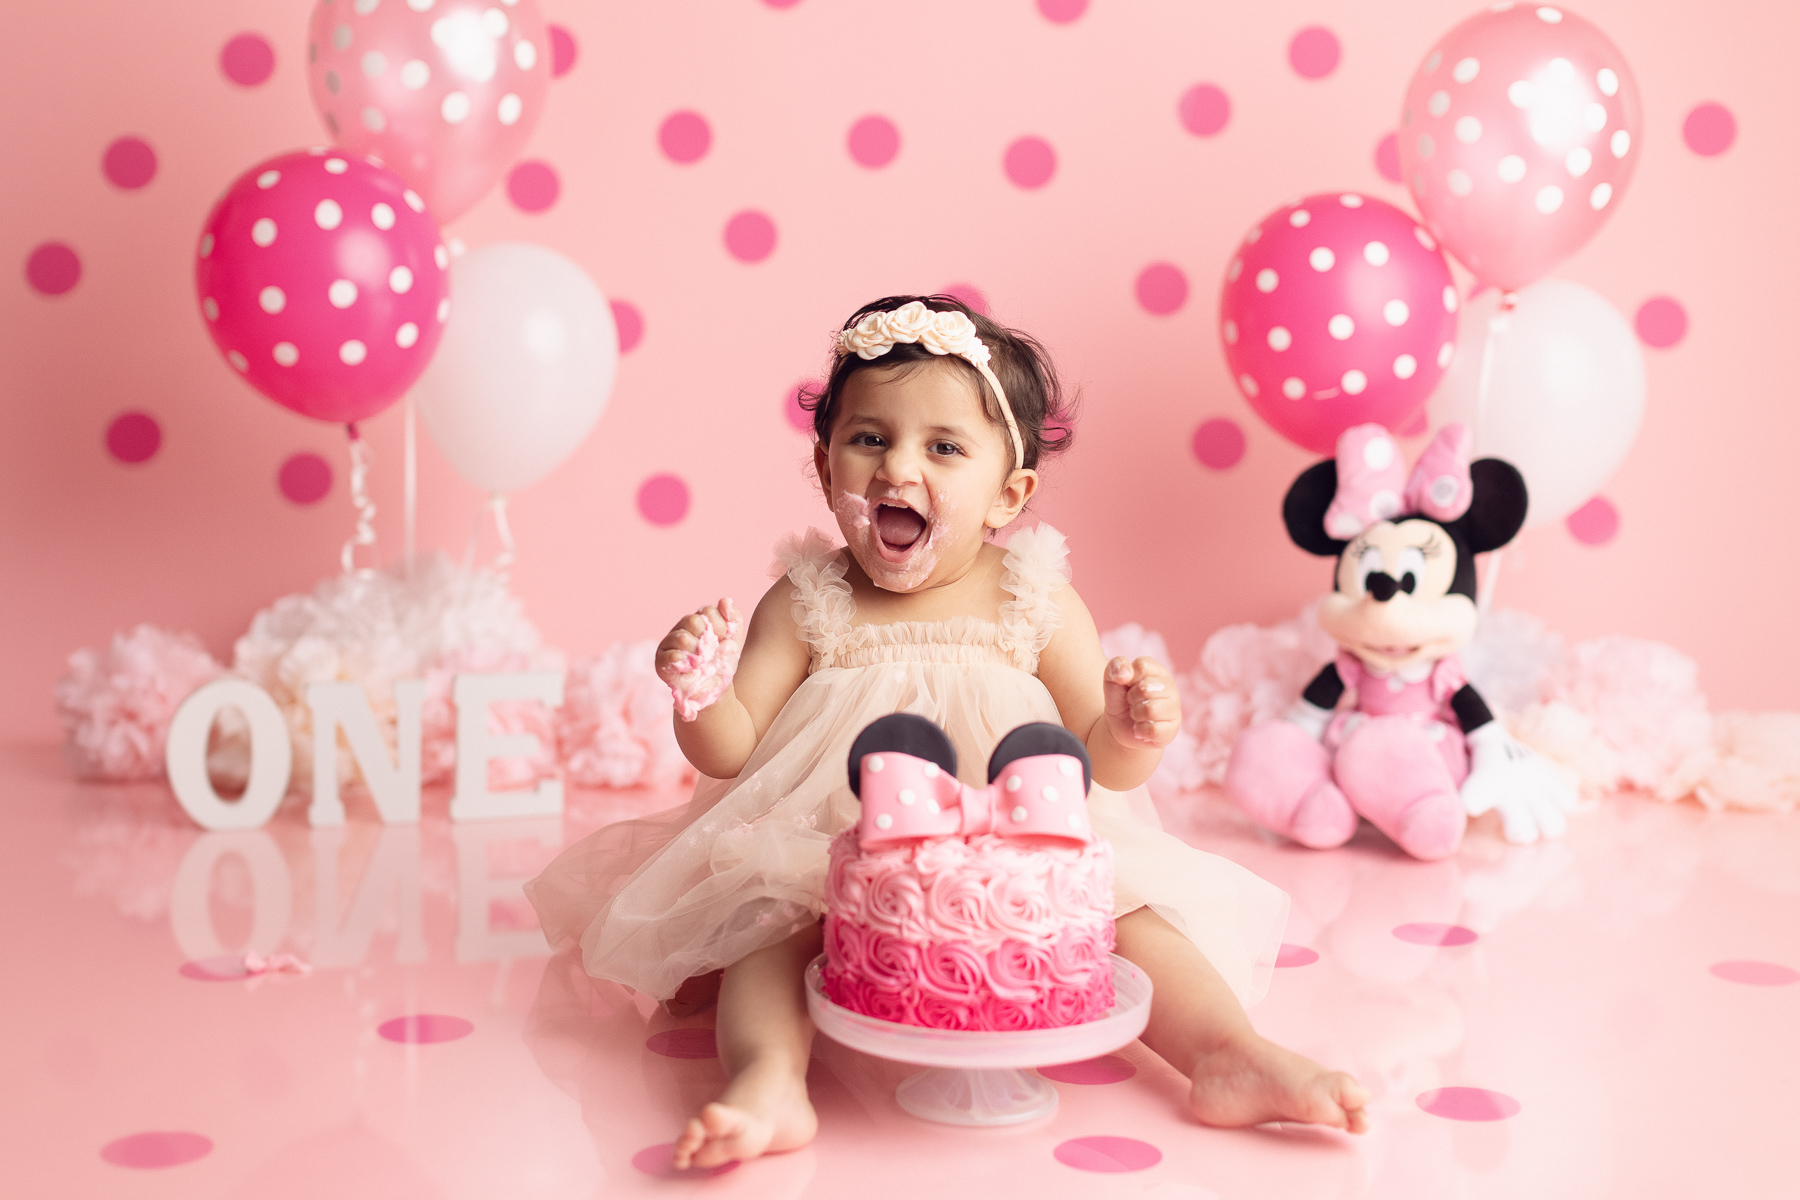 Cake smash photography Theme and preparation - Minnie mouse - baby girl - best cake smash photographer in surrey BC